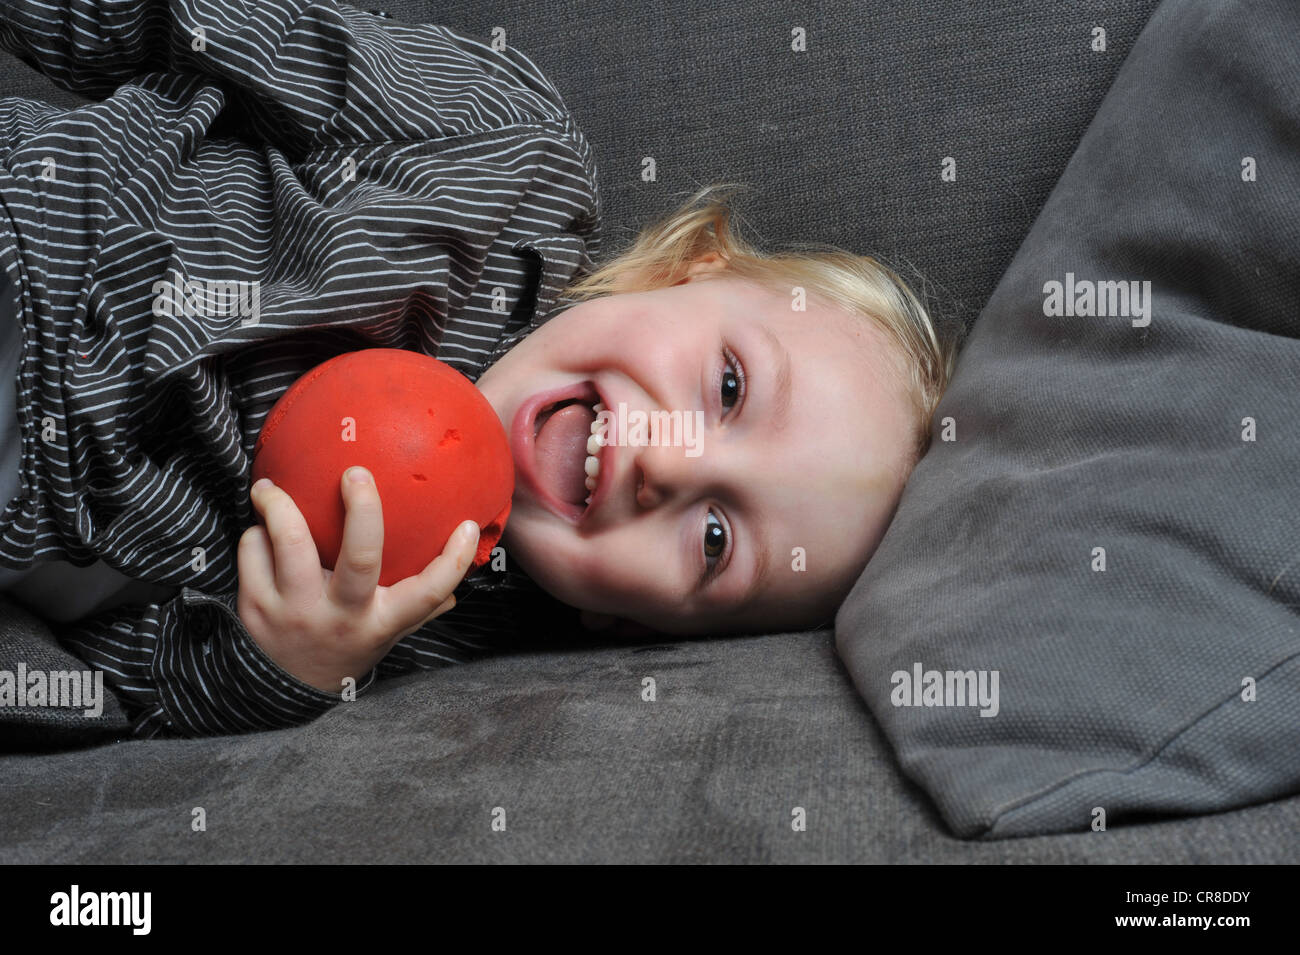 Boy with red ball Stock Photo